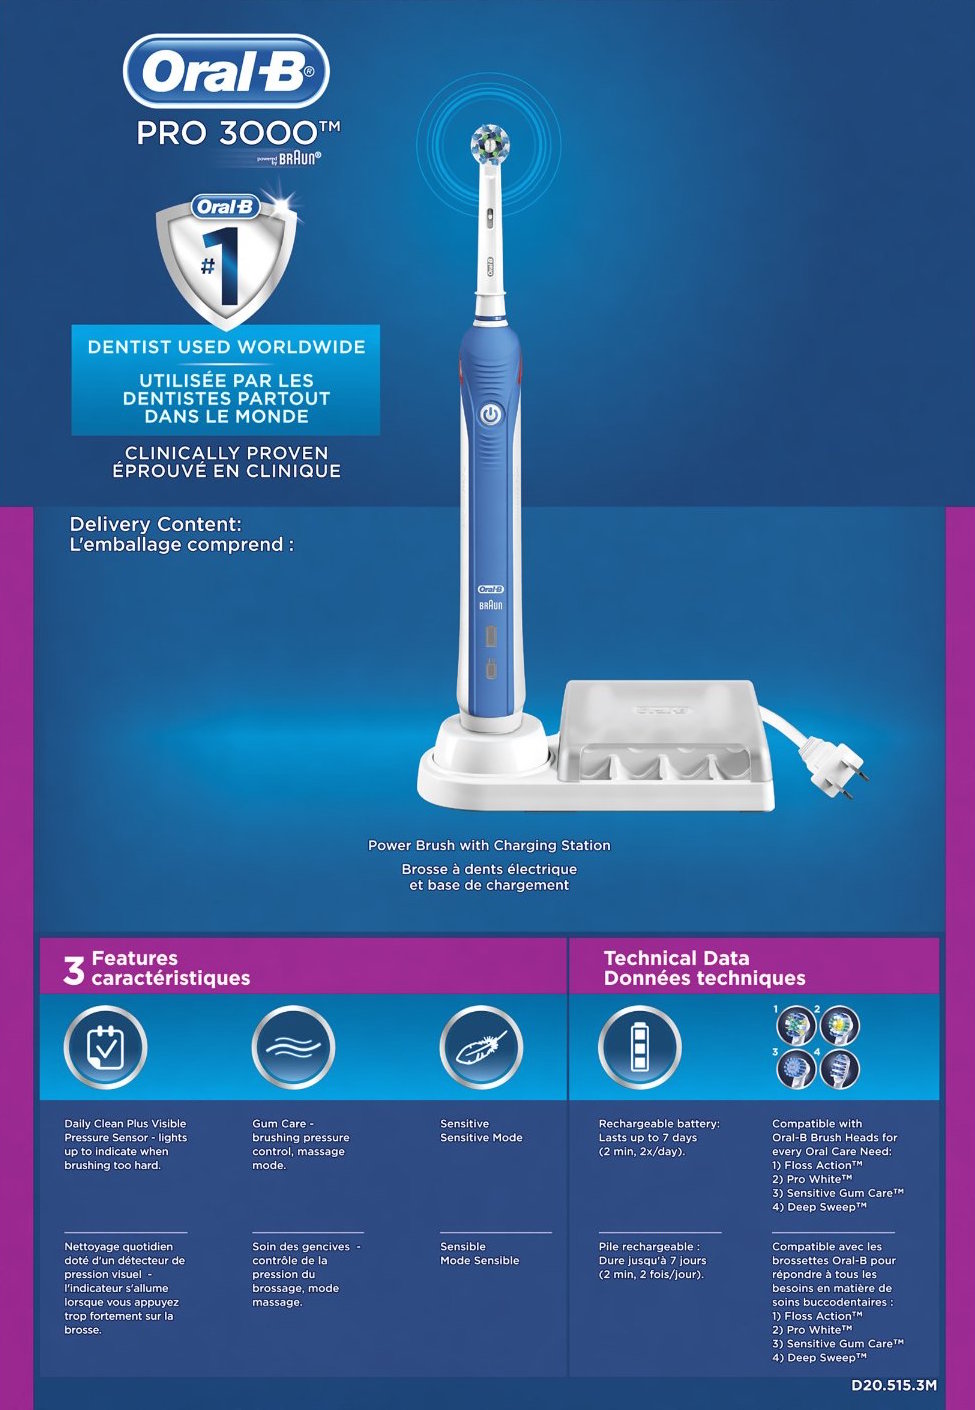 Save $32 on this Oral-B 7000 SmartSeries Electric Toothbrush this   Prime Day